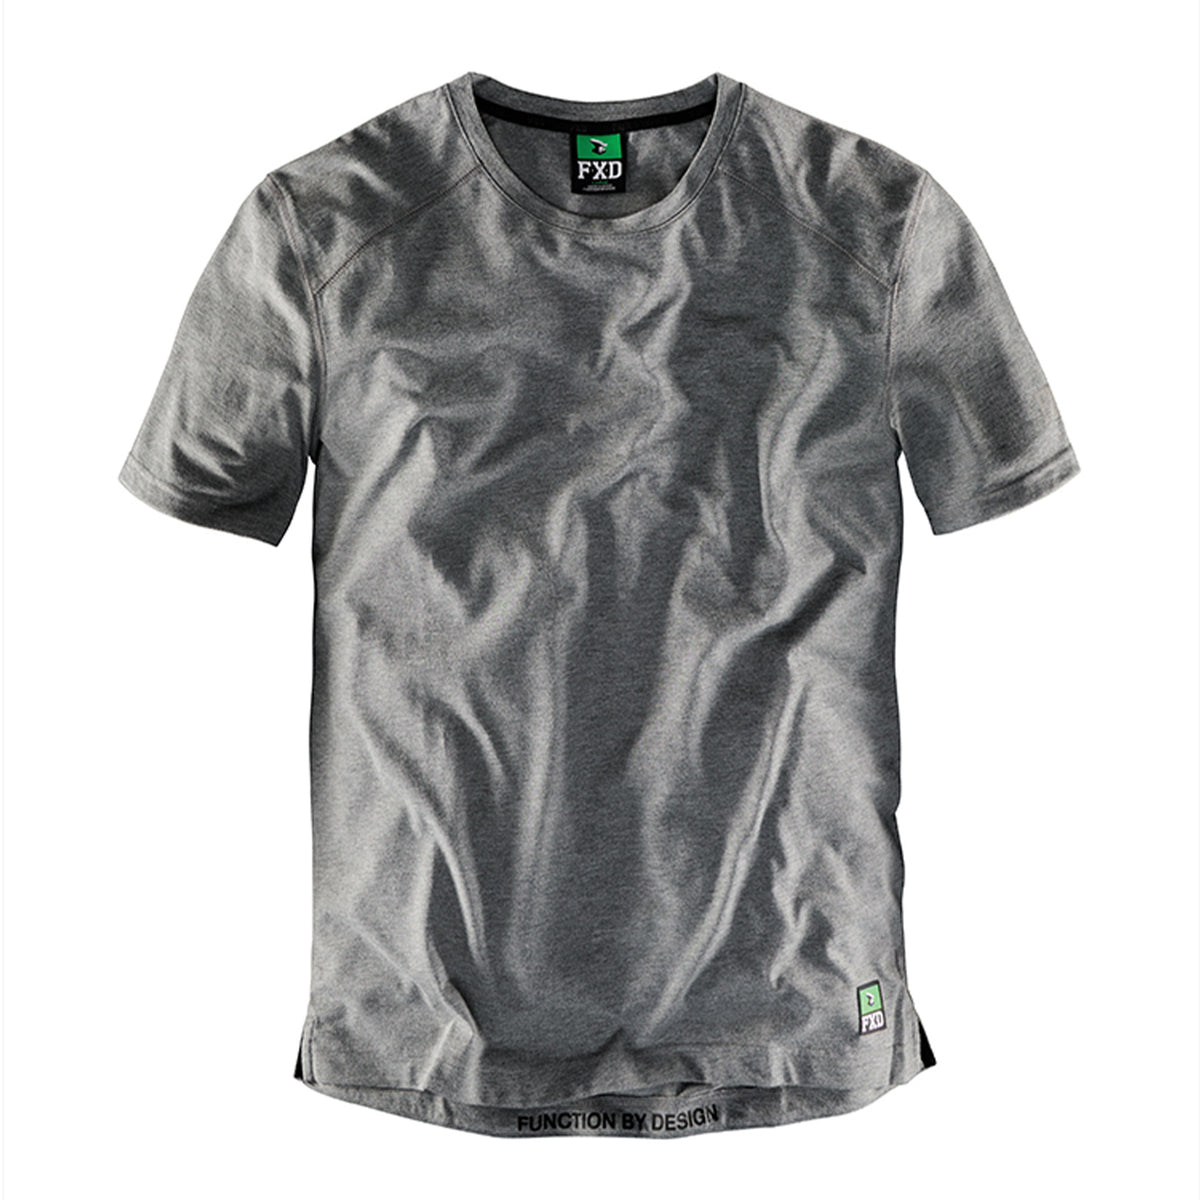 fxd technical work tee in grey